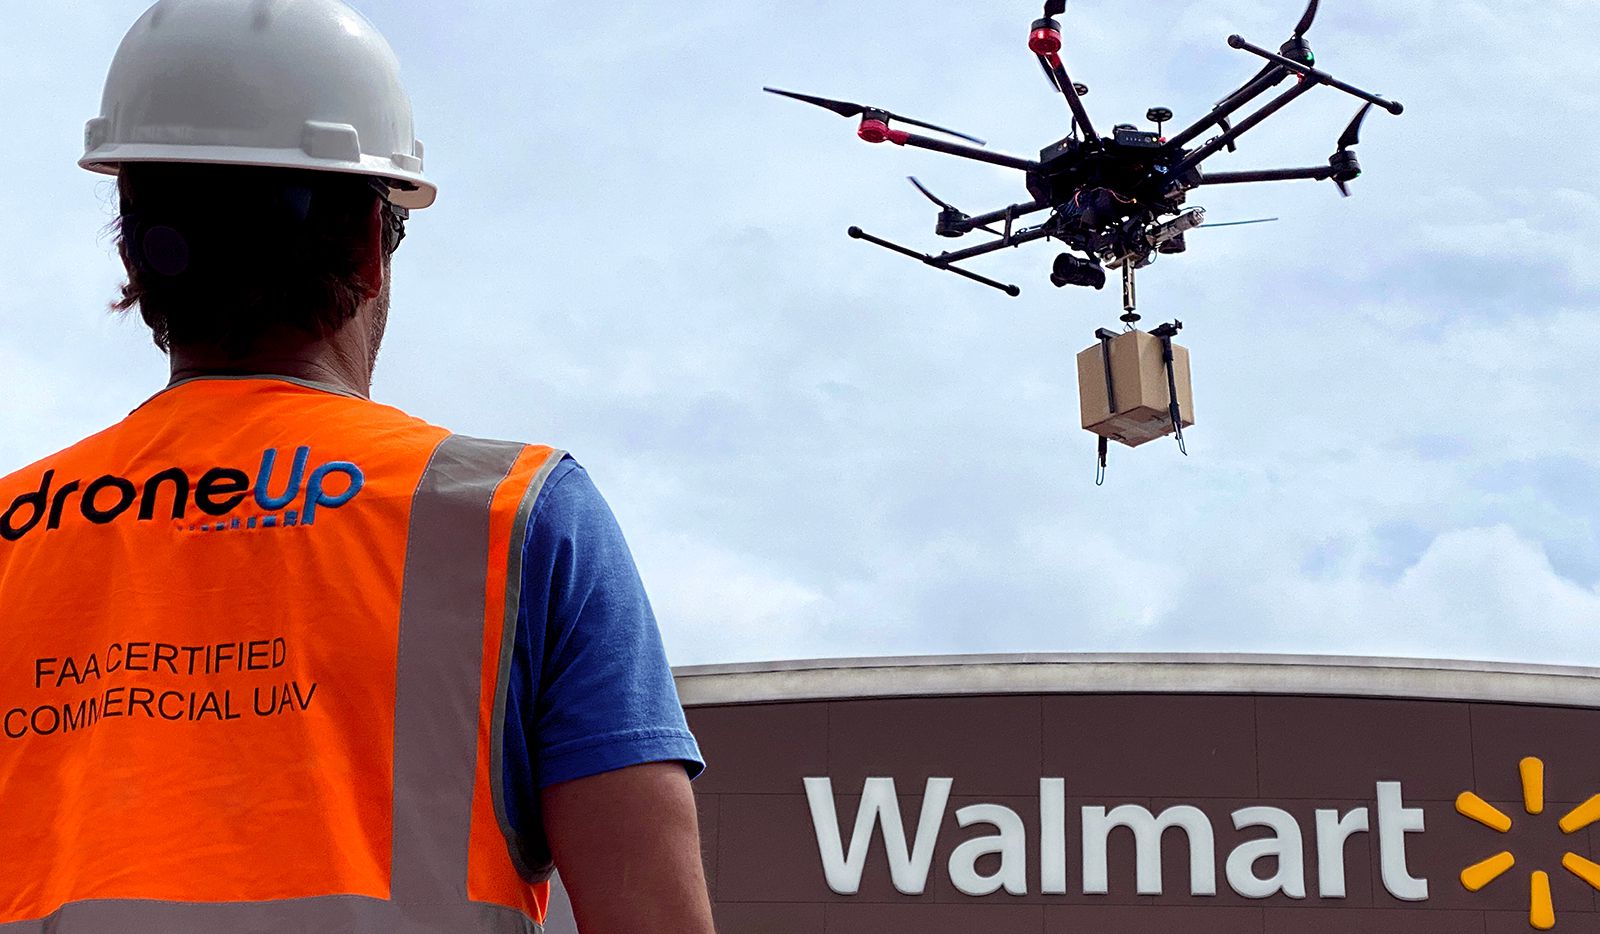 Walmart expands drone delivery service to six states and 4 million households